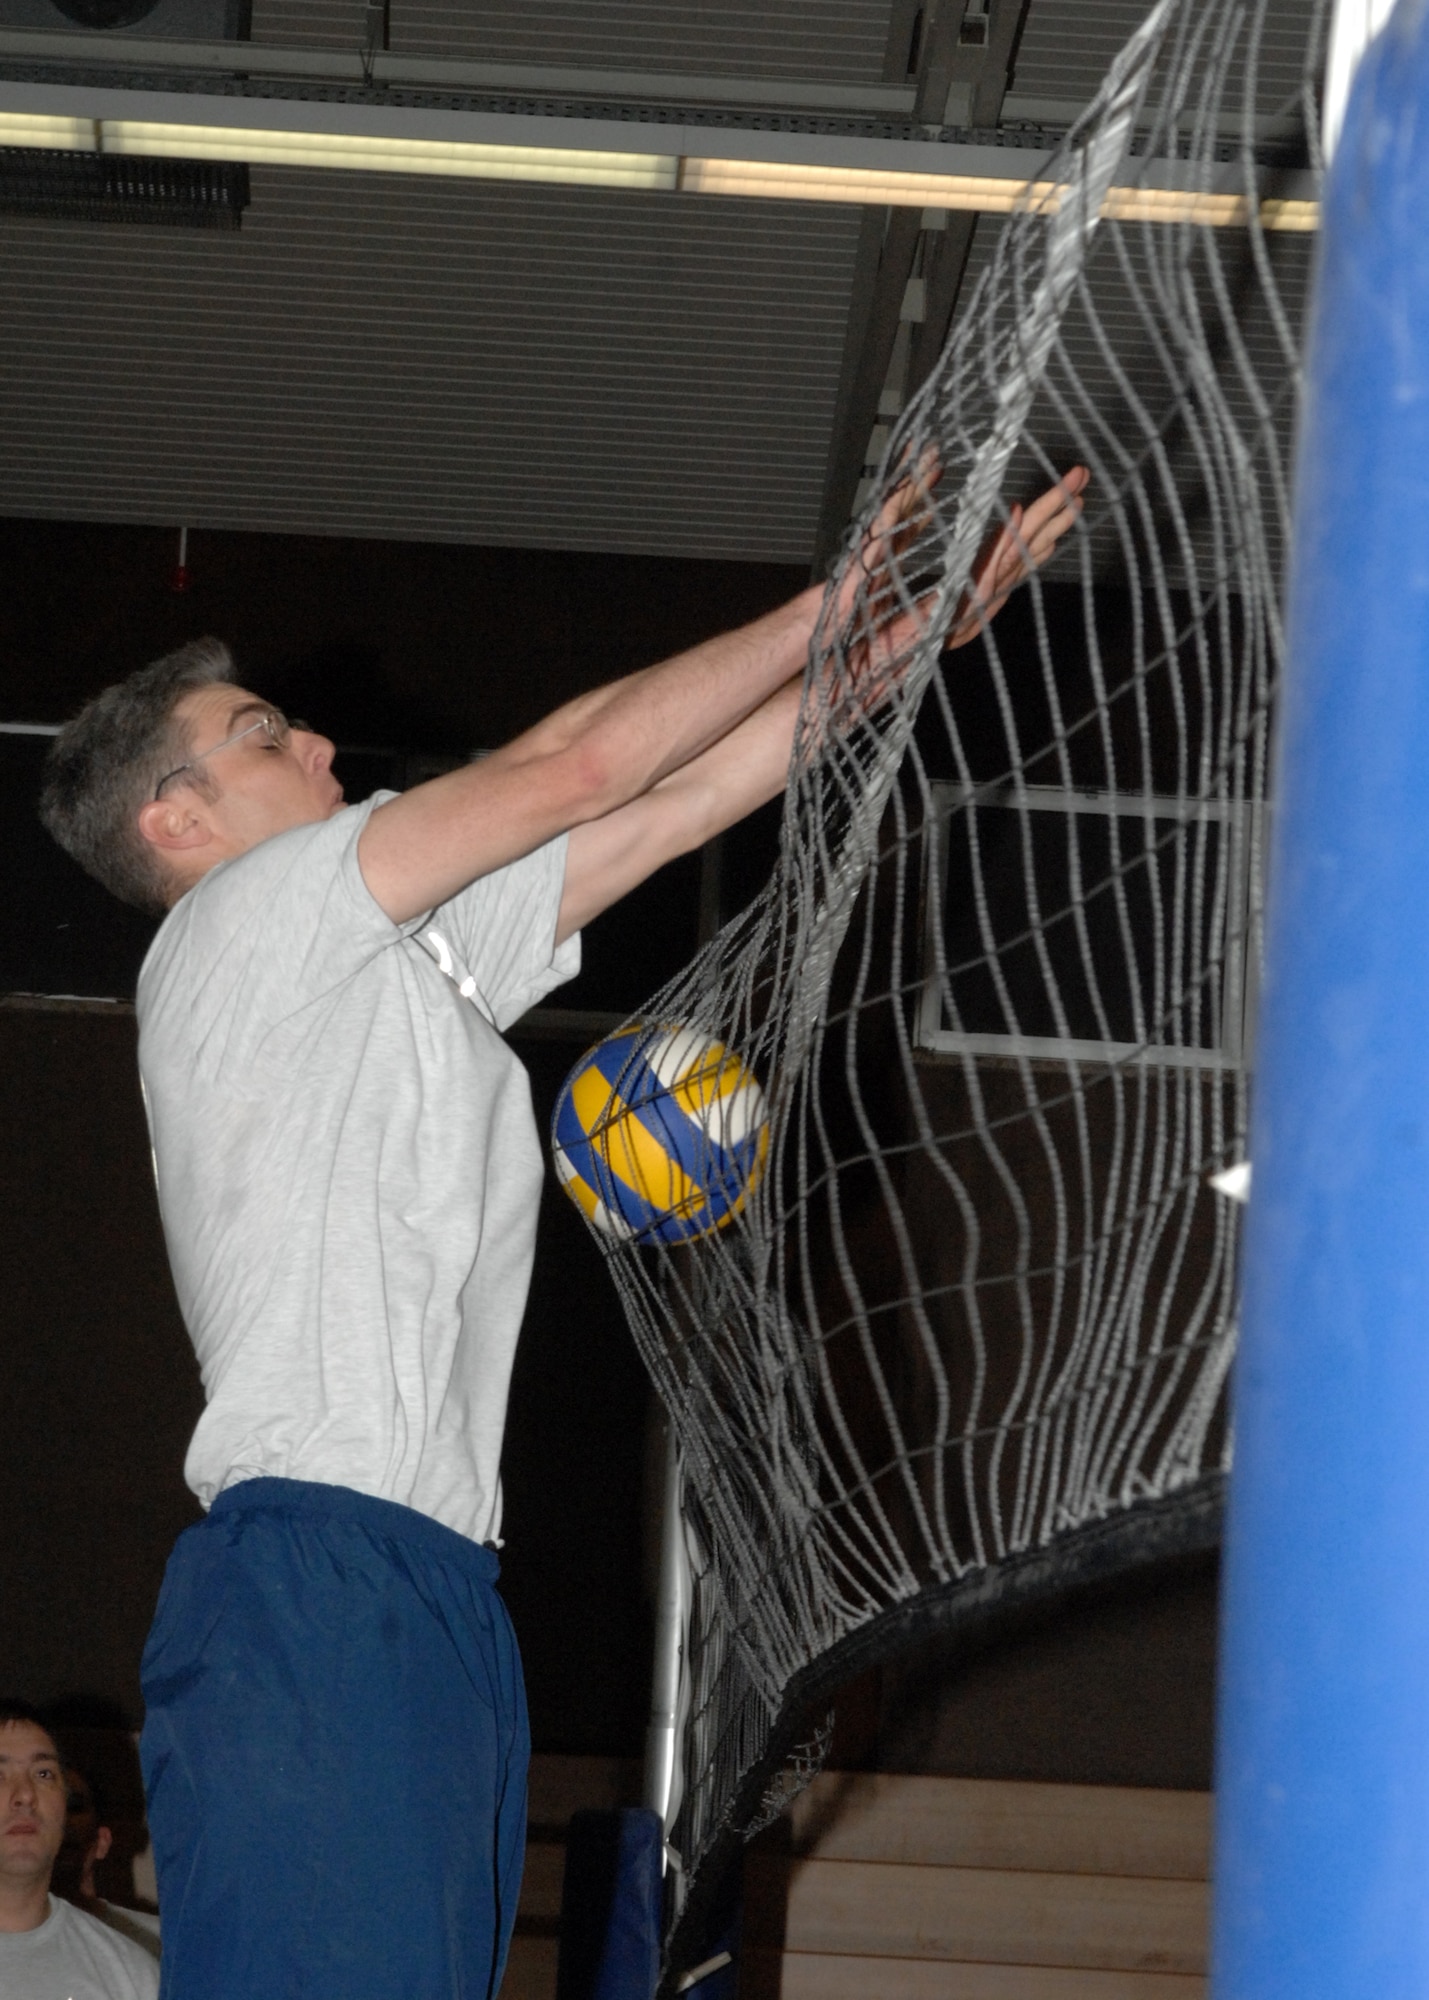 SPANGDAHLEM AIR BASE, Germany – Master Sgt. Jeff Dawson, 52nd Communications Squadron, takes one for the Top 3 team in the volleyball game against the Tier II at the Skelton Memorial Fitness Center Jan. 25, 2008. (U.S. Air Force photo/Airman 1st Class Jenifer Calhoun)